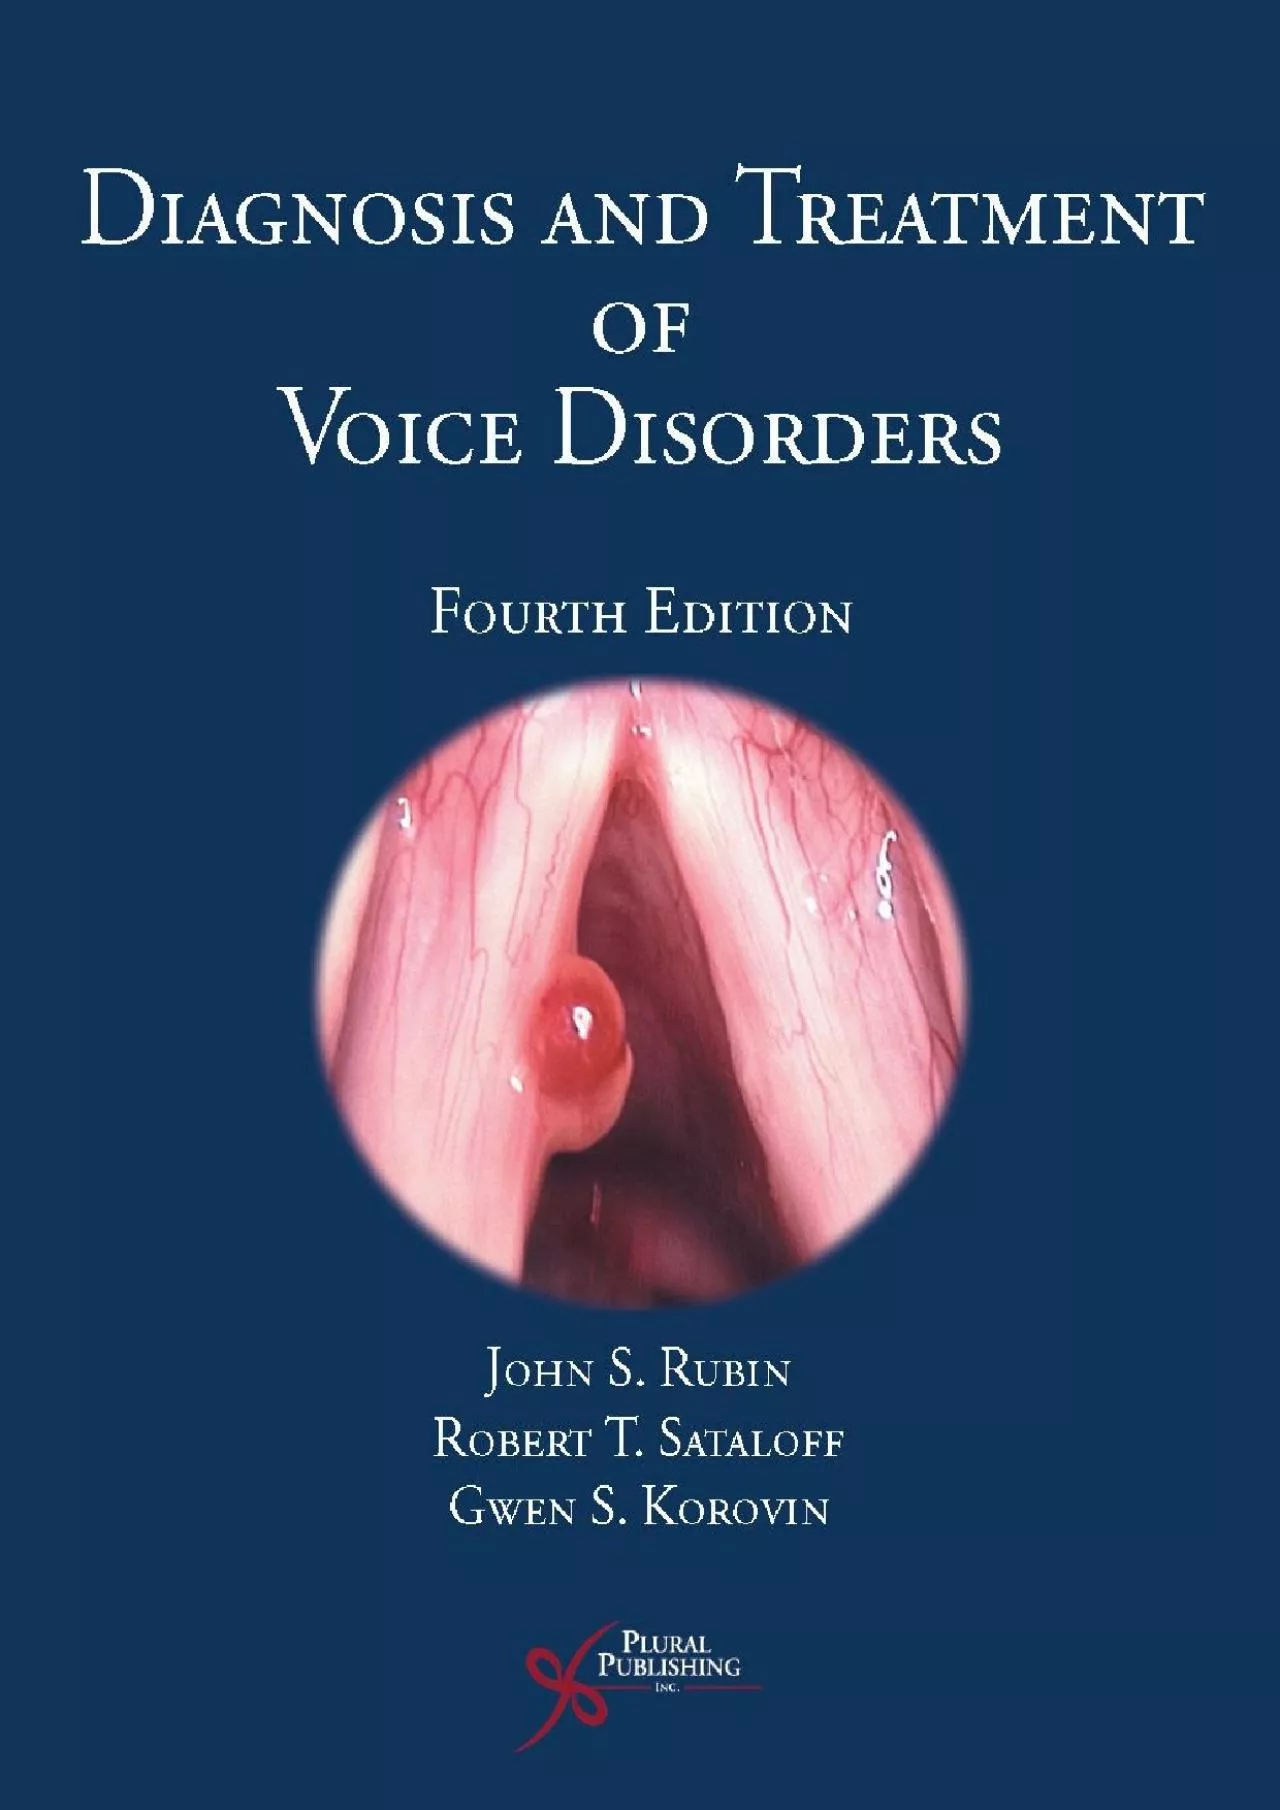 (EBOOK)-Diagnosis and Treatment of Voice Disorders